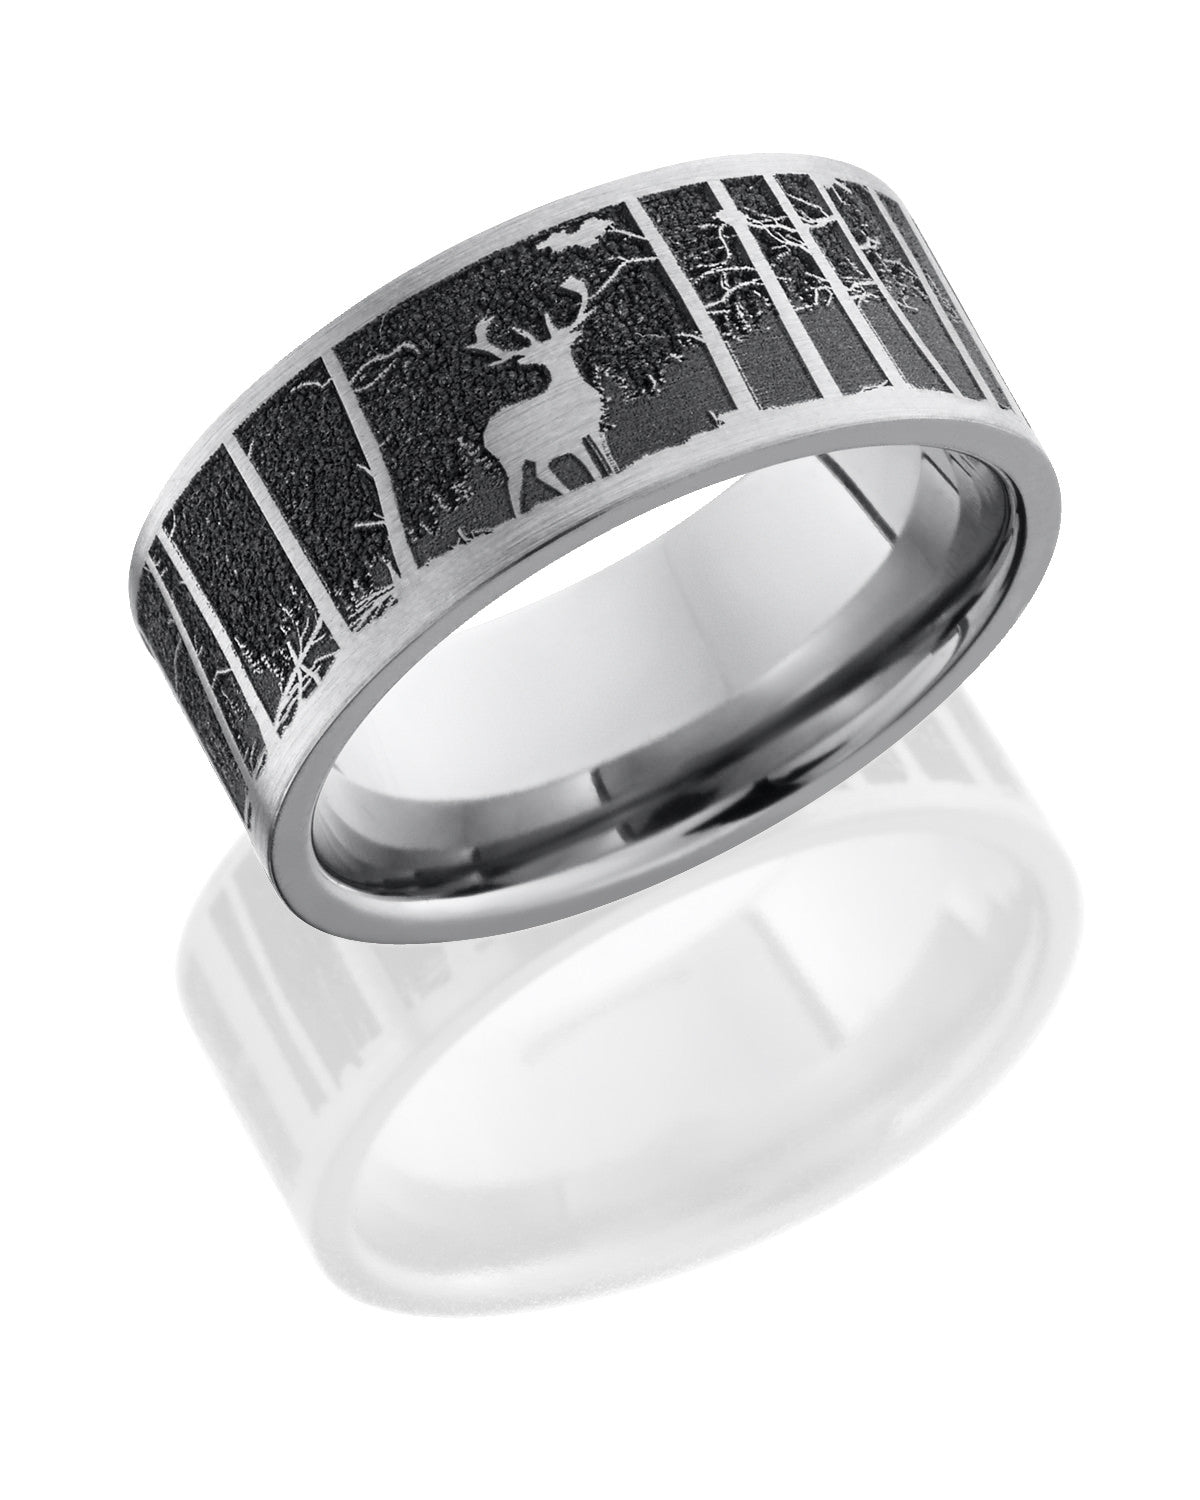 Titanium 9mm Flat Band with Laser Carved Elk Pattern and Mountains-Lashbrook-Howard's Diamond Center